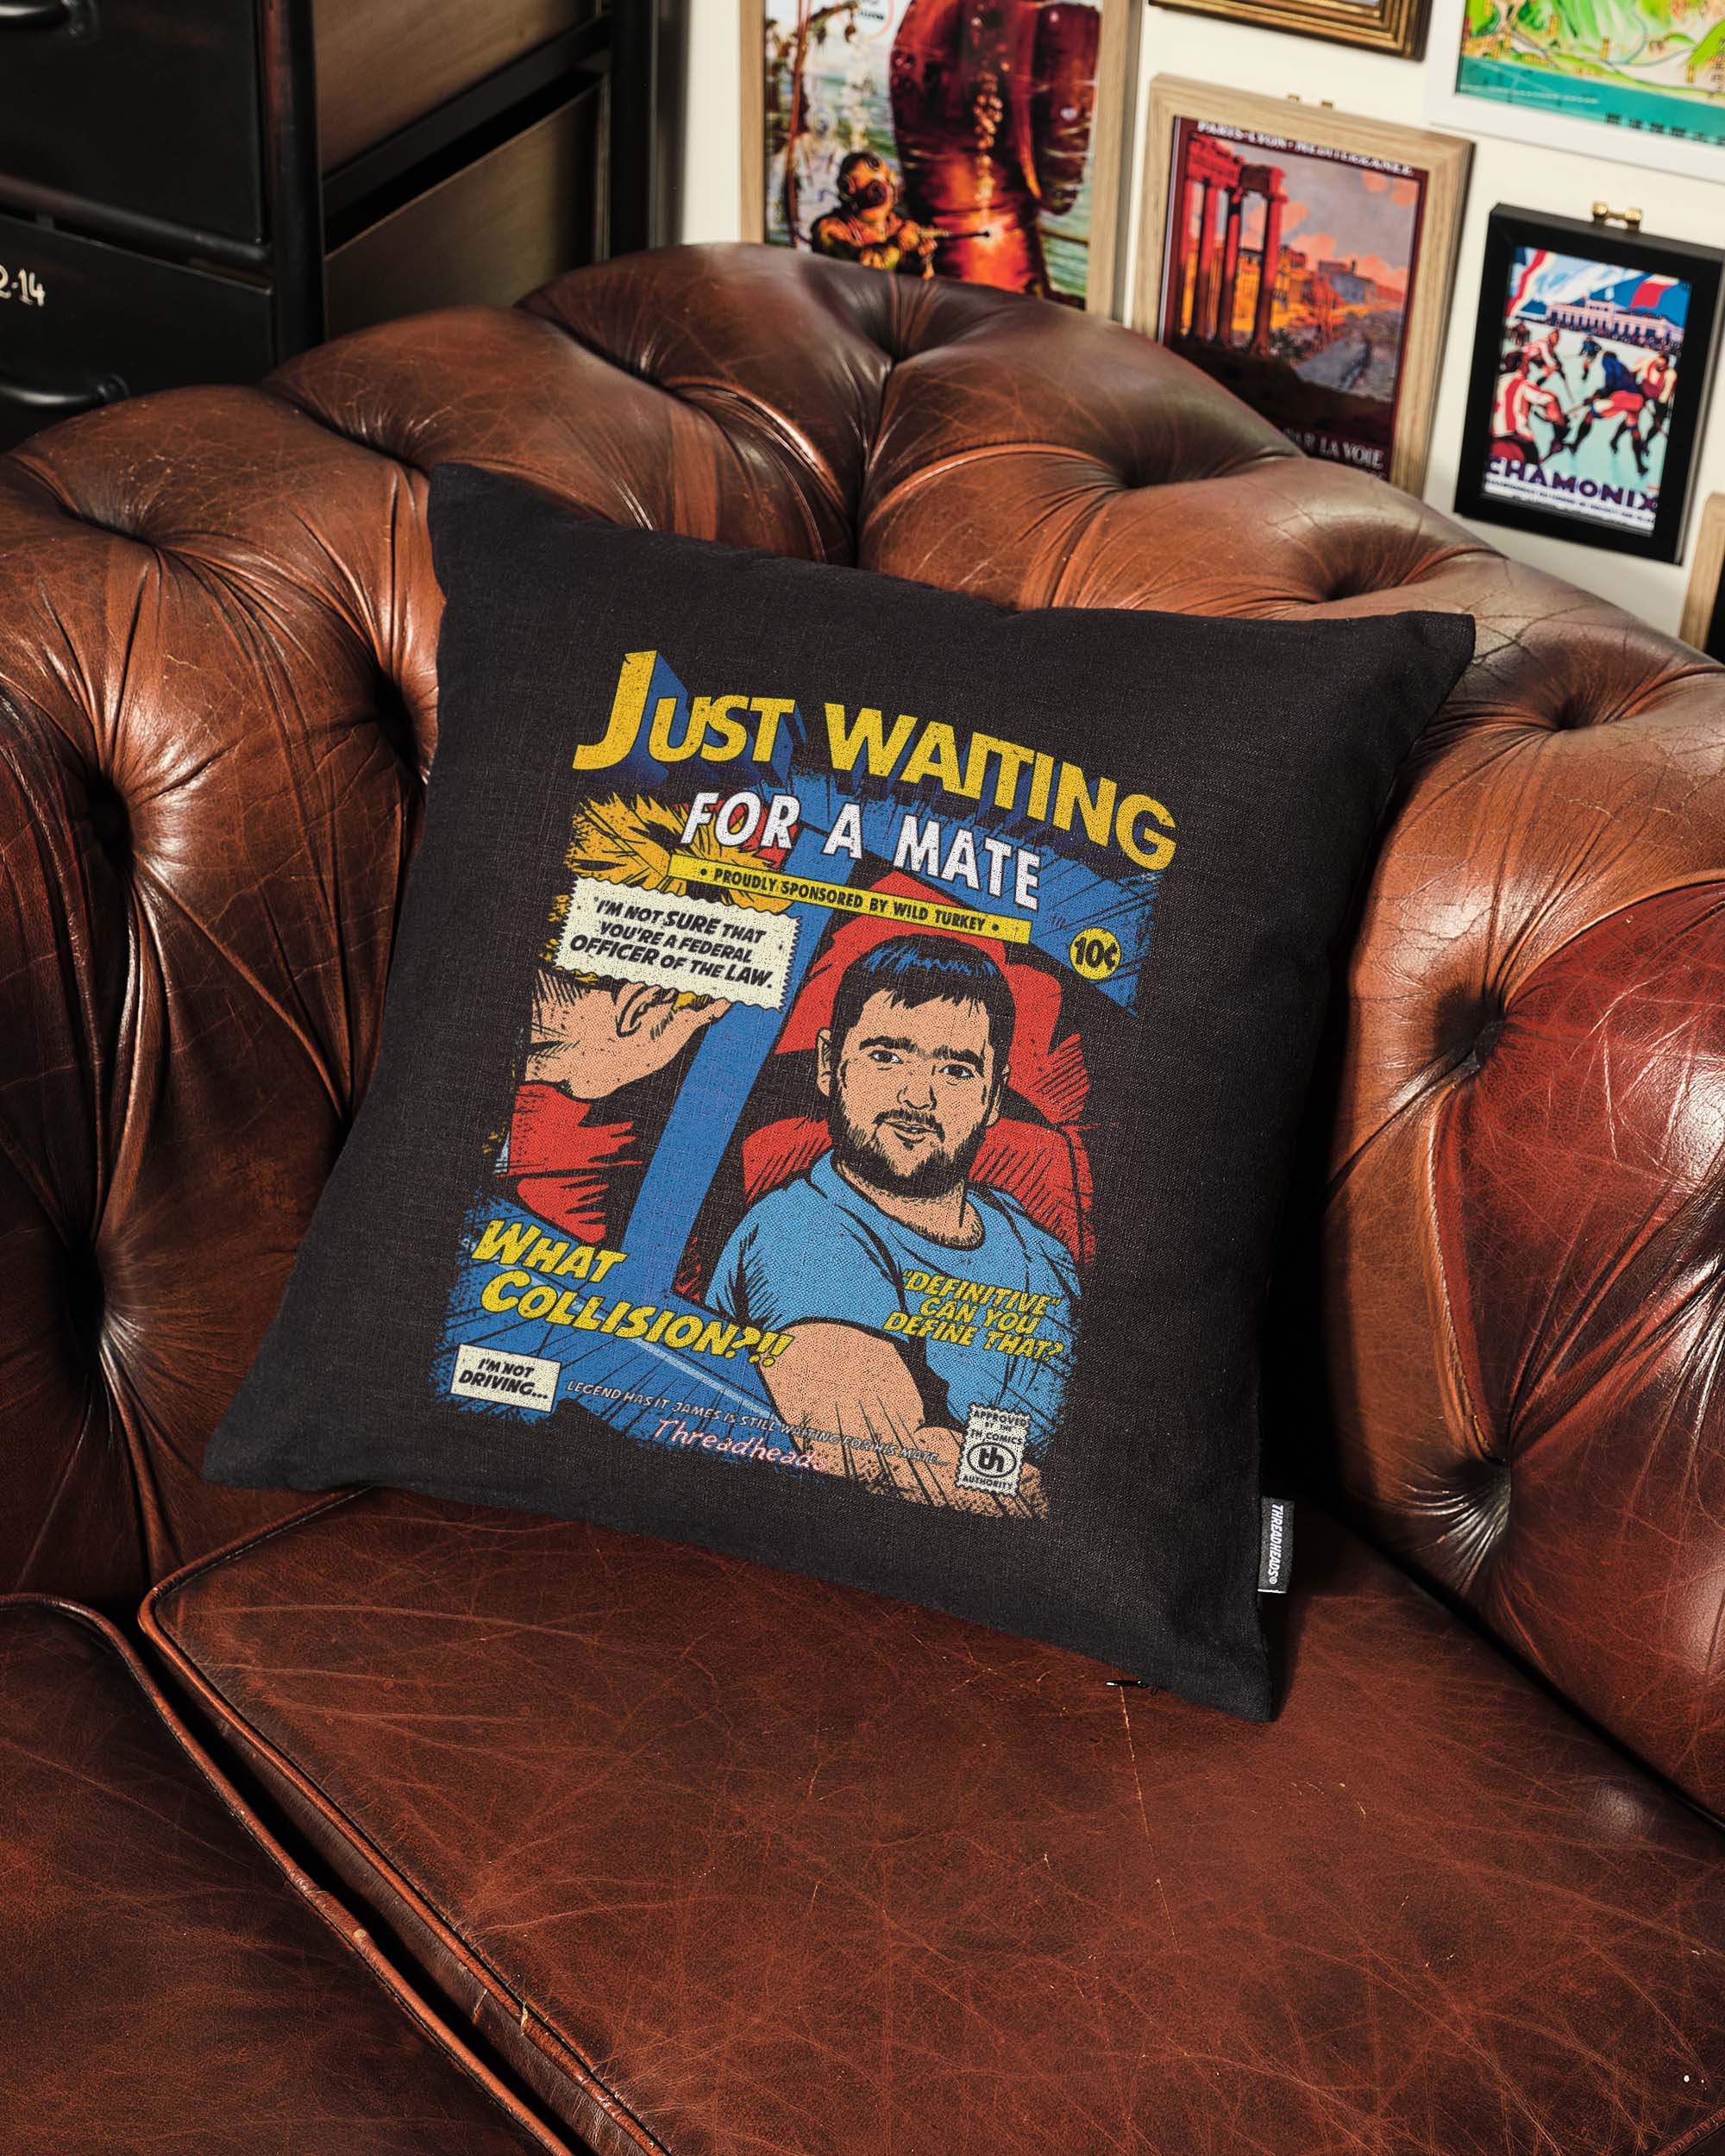 Just Waiting for a Mate Cushion Australia Online